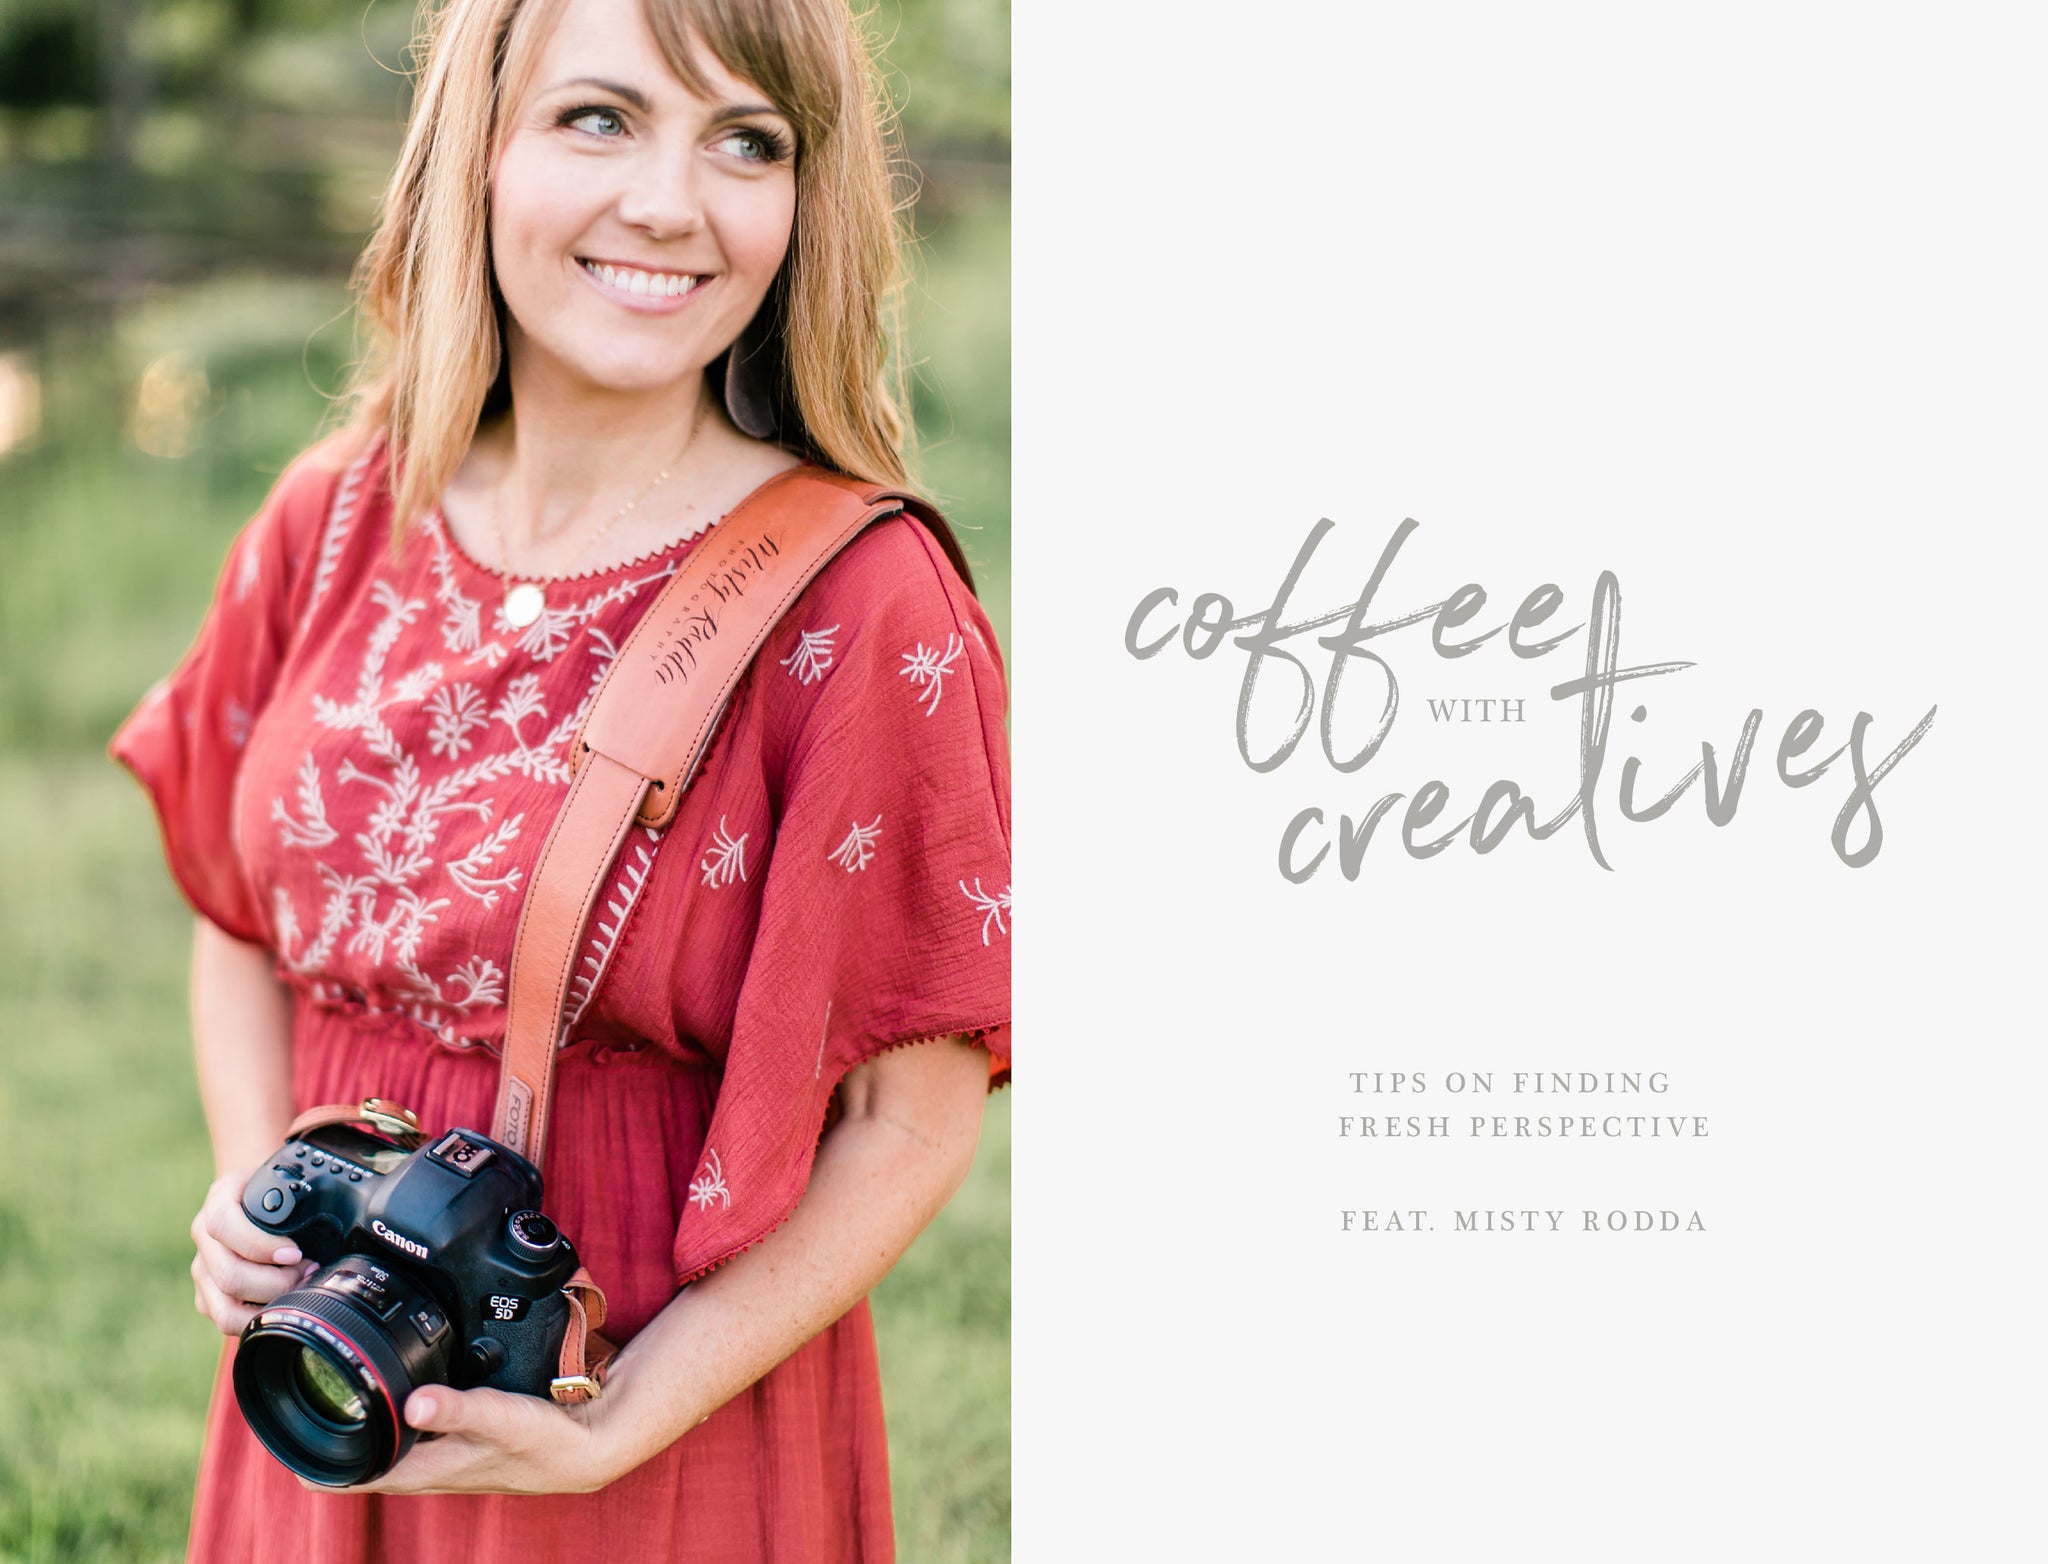 Professional wedding and portrait photographer, Misty Rodda, shares her tips and tricks on how to keep your perspective and creativity fresh!